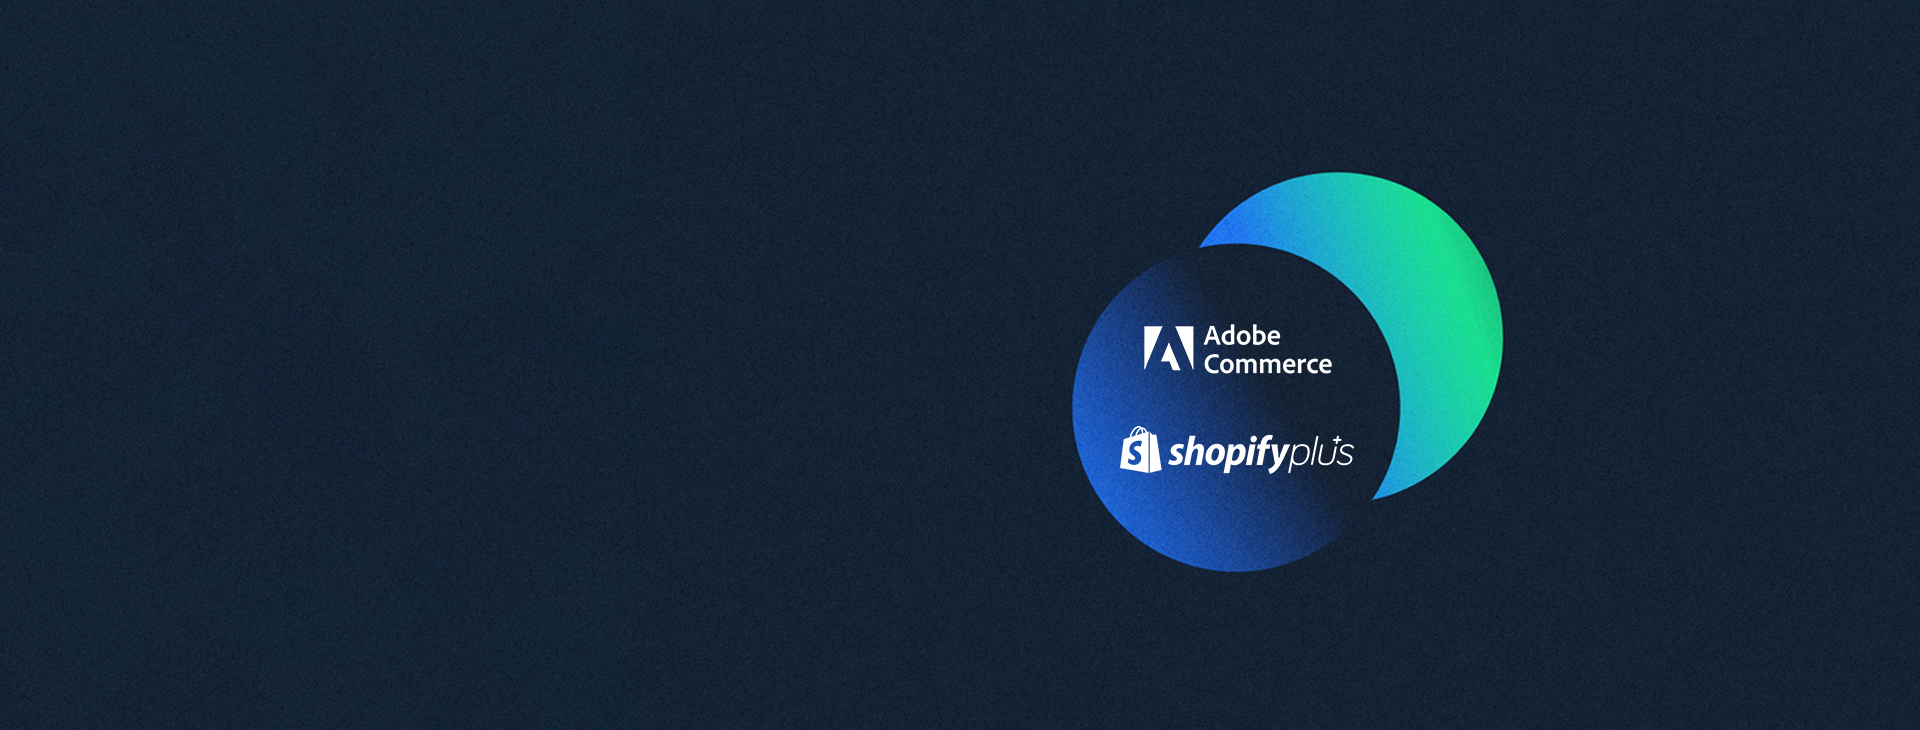 Abstract header image showing Adobe Commerce and Shopify Plus